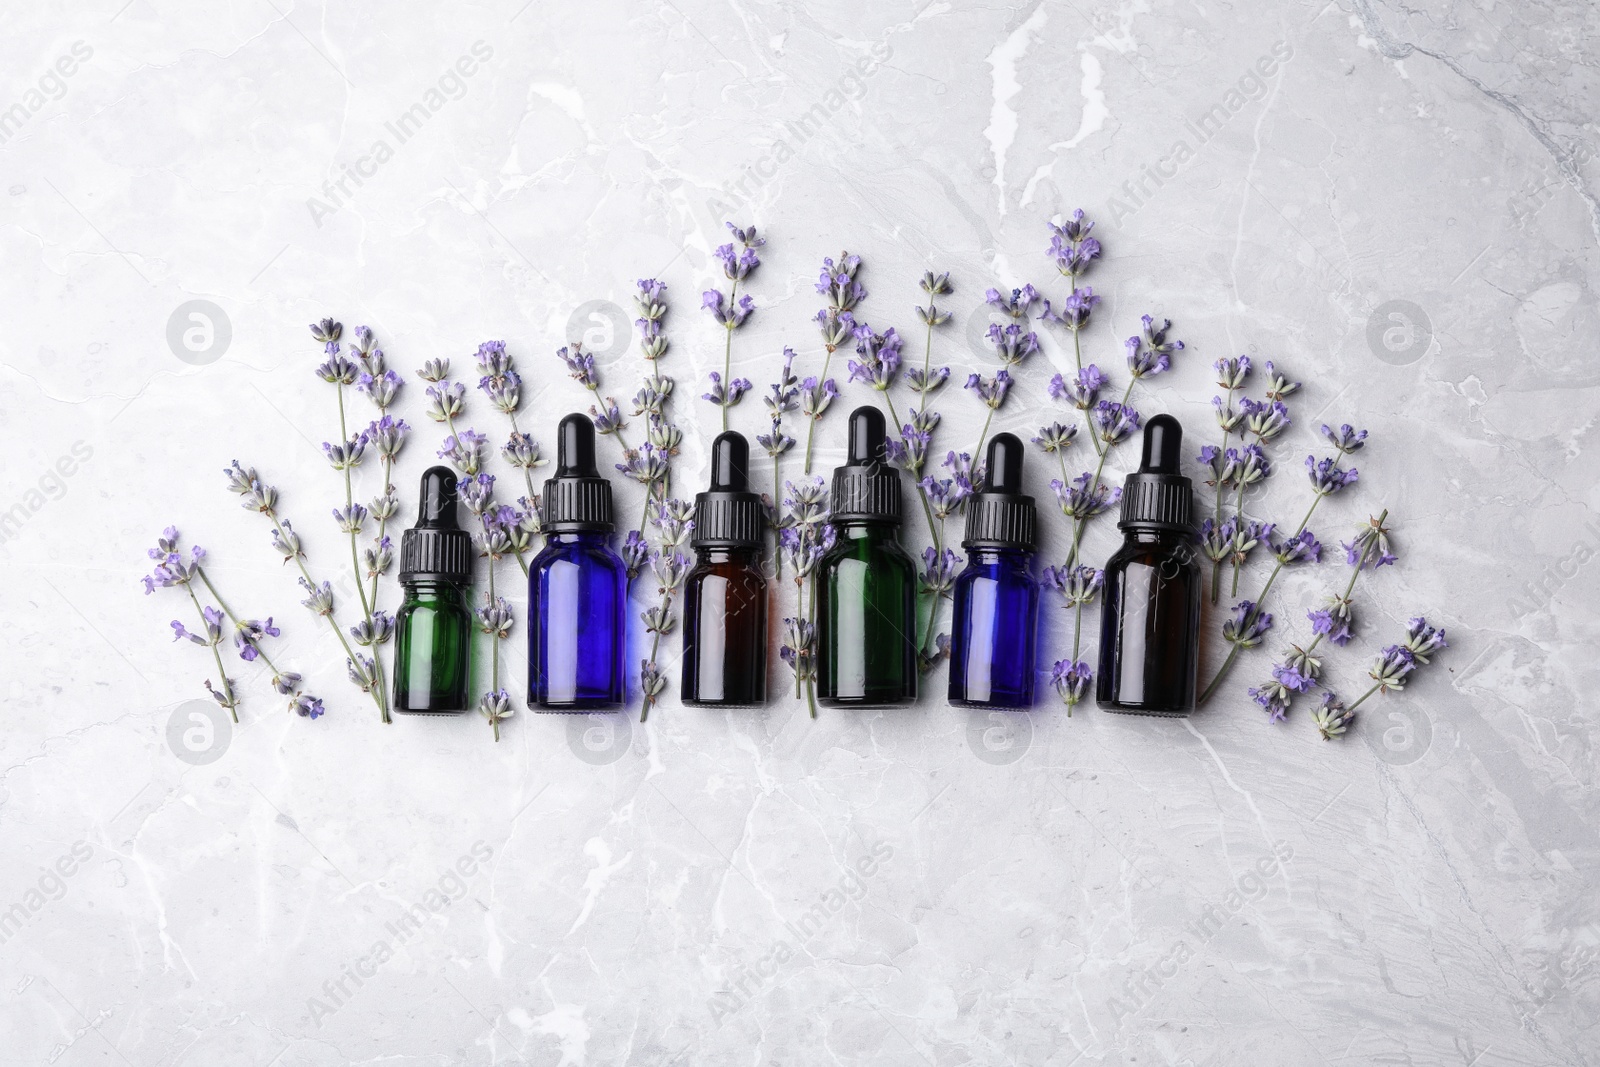 Photo of Flat lay composition with bottles of natural lavender essential oil on grey stone background